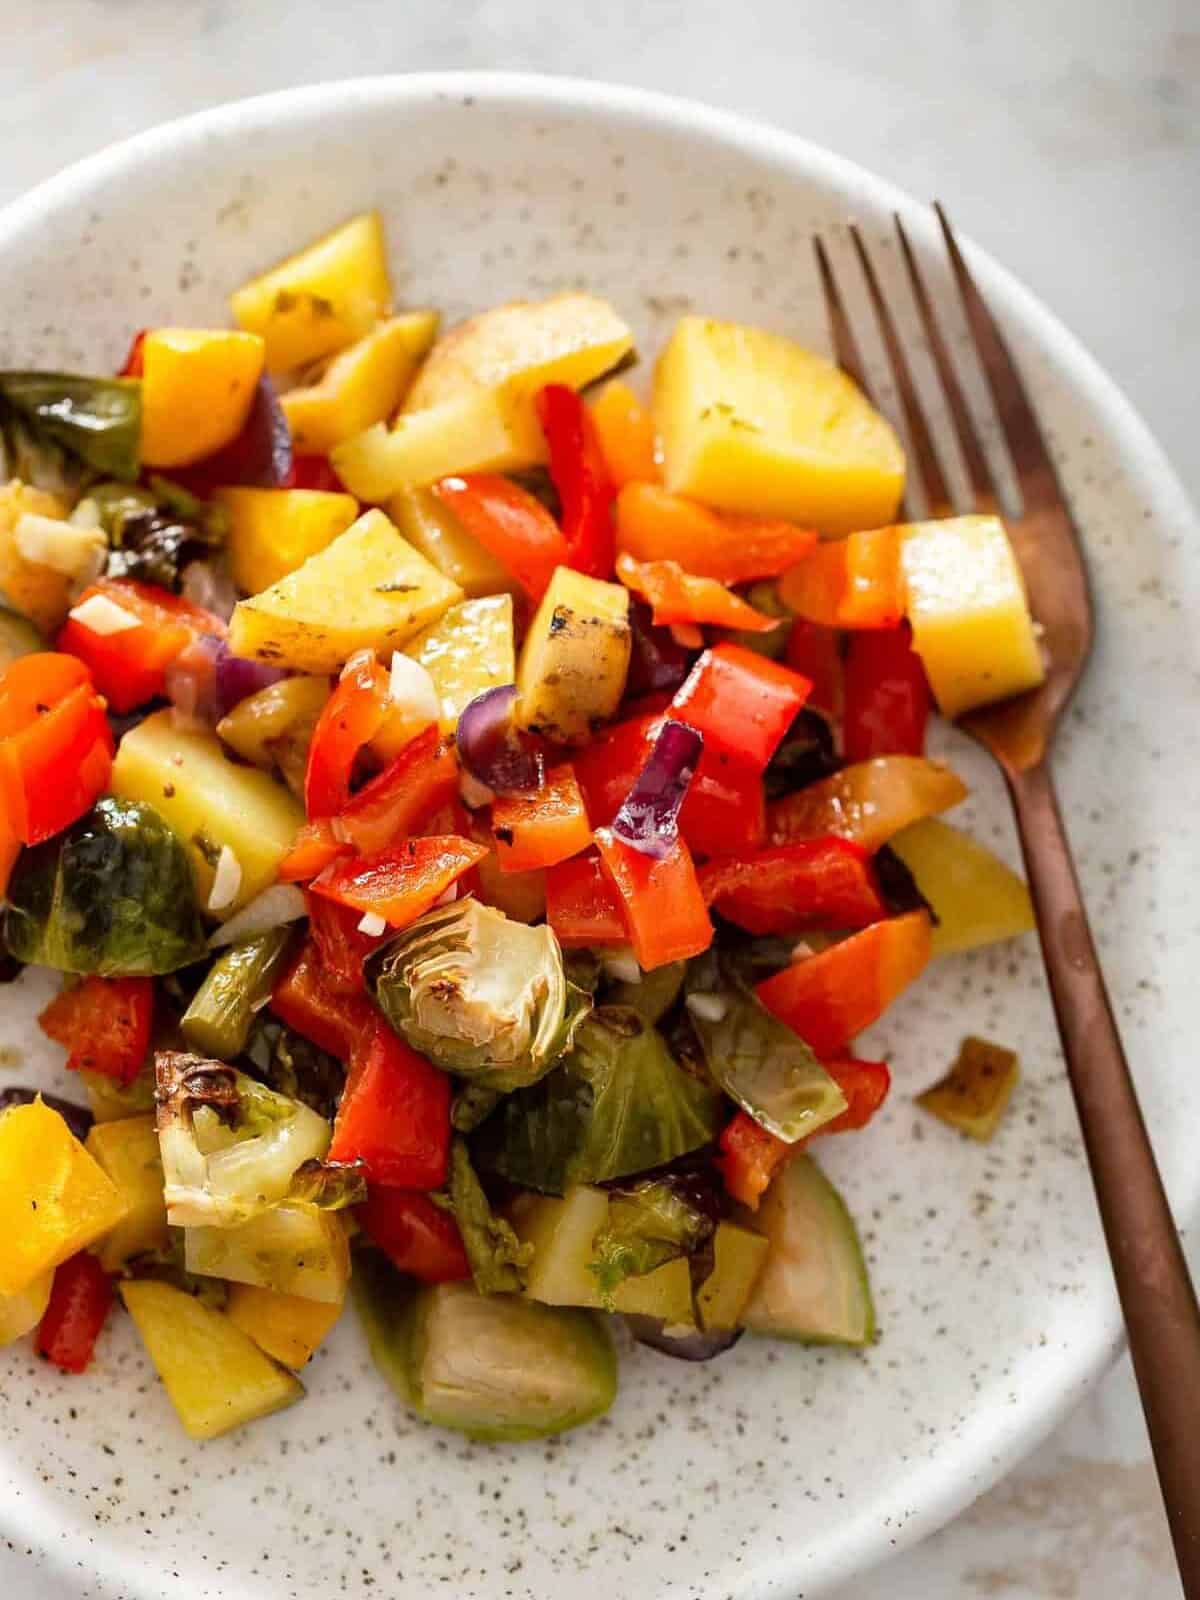 cooked brussels sprouts, squash, potatoes on a plate